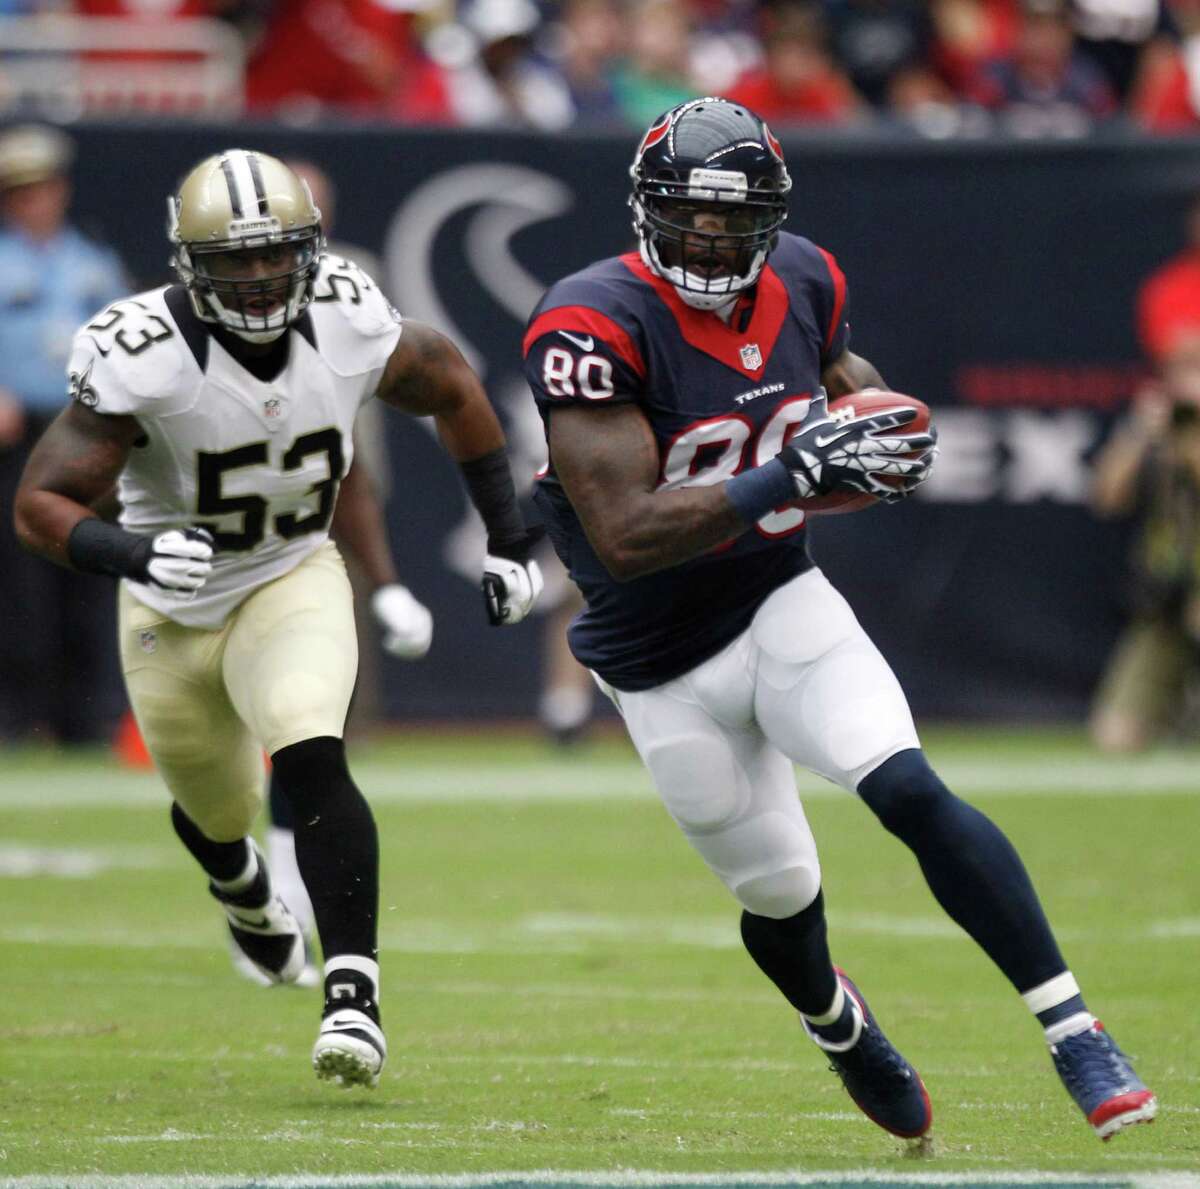 Texans wide receiver Andre Johnson showed he's ready for the season with seven receptions for 131 yards.